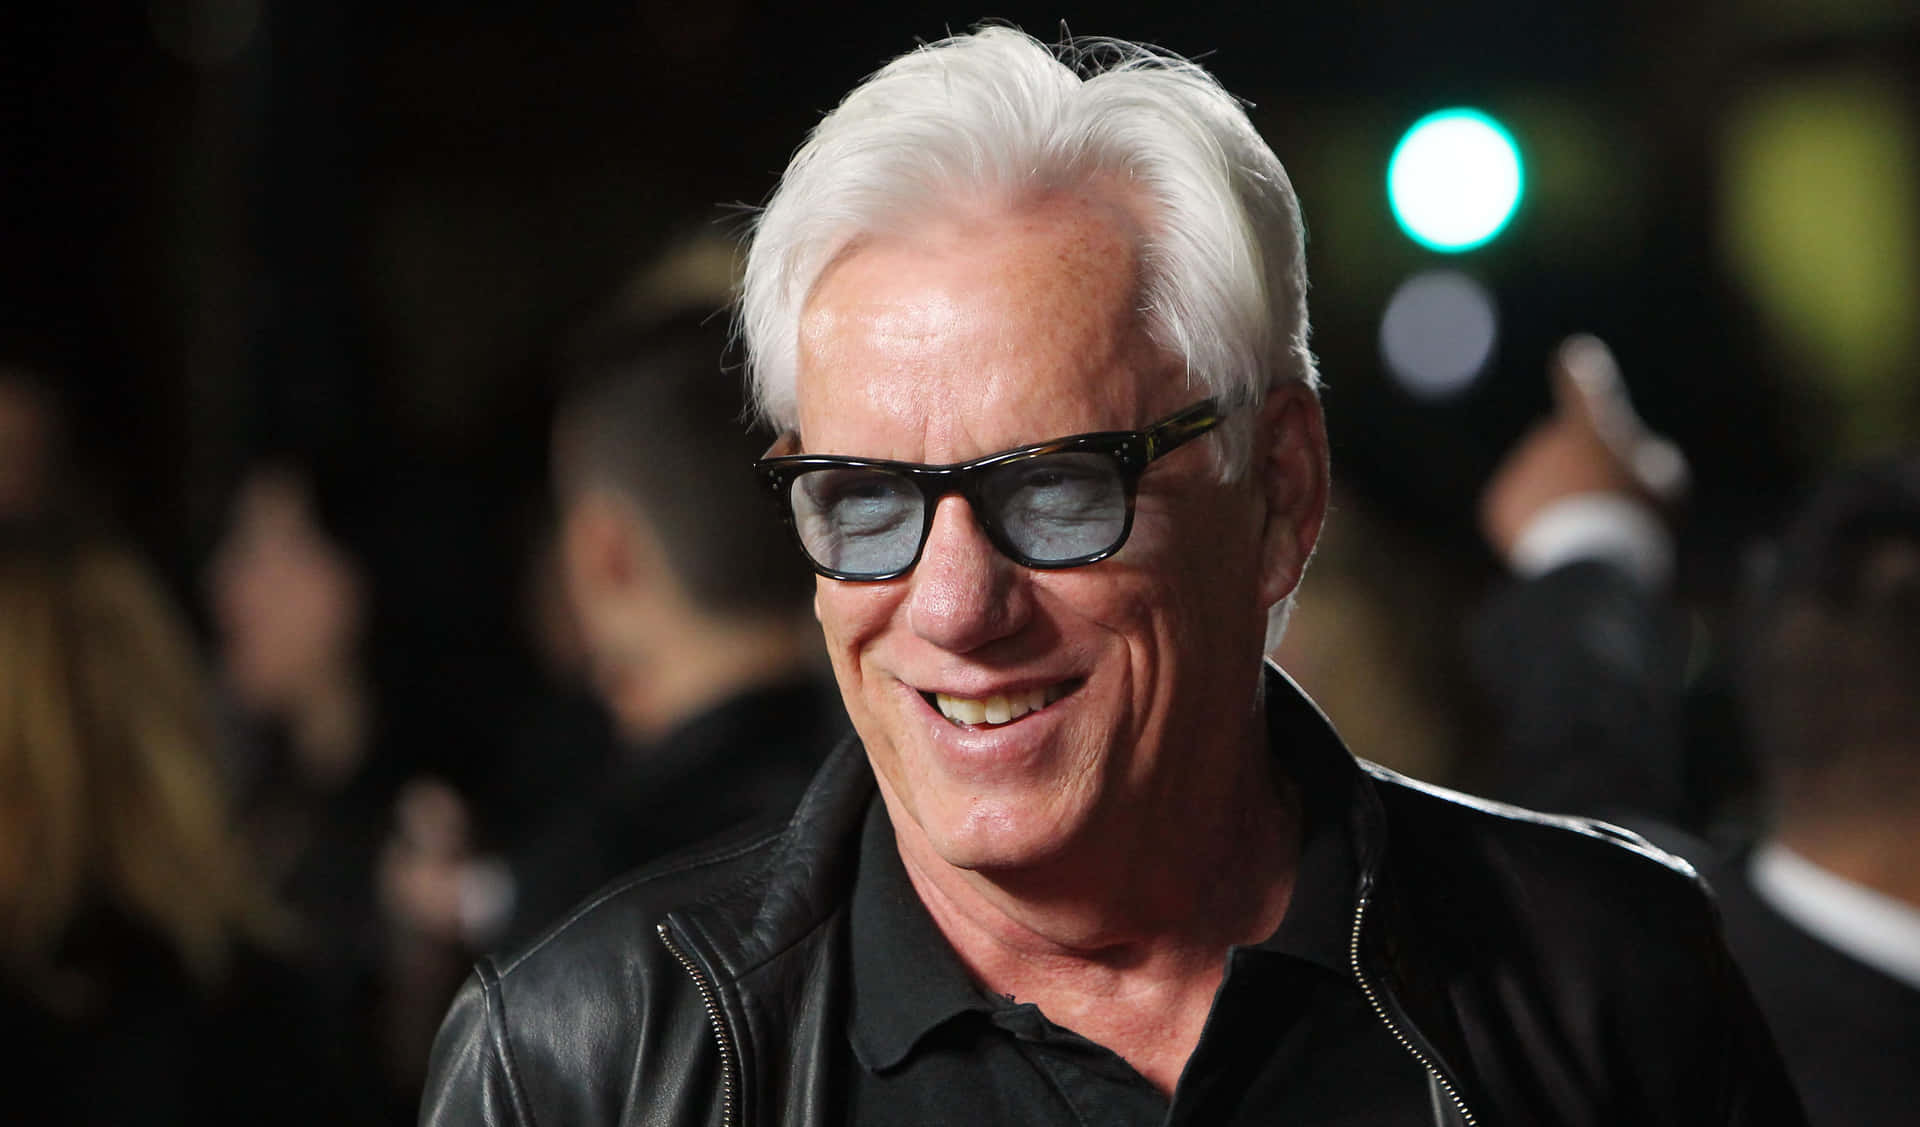 Jameswoods Is An American Actor And Producer Known For His Powerful Performances In Both Movies And Television Shows. Fondo de pantalla